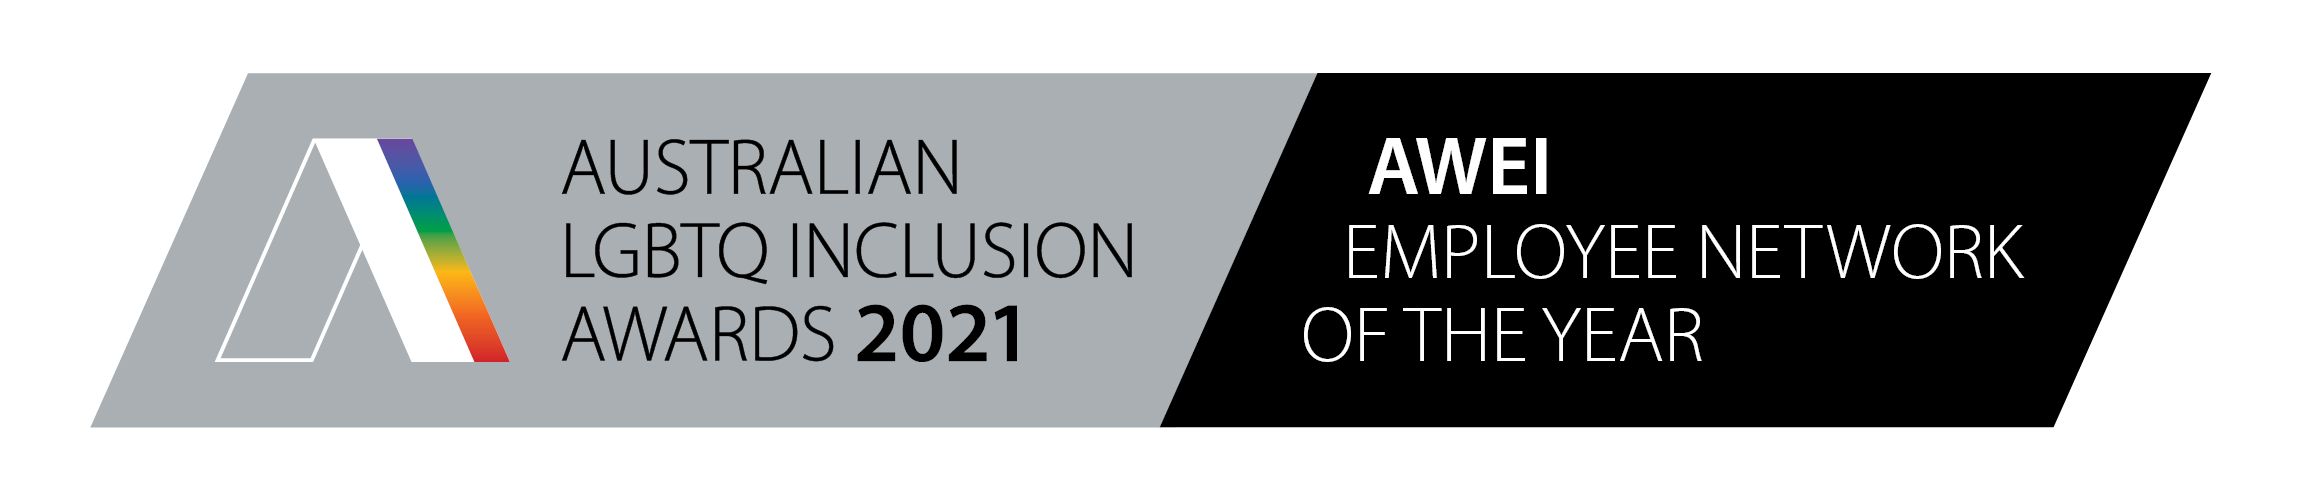 Australian LGBTQ Inclusion Awards 2021 – AWEI Employee Network of the Year